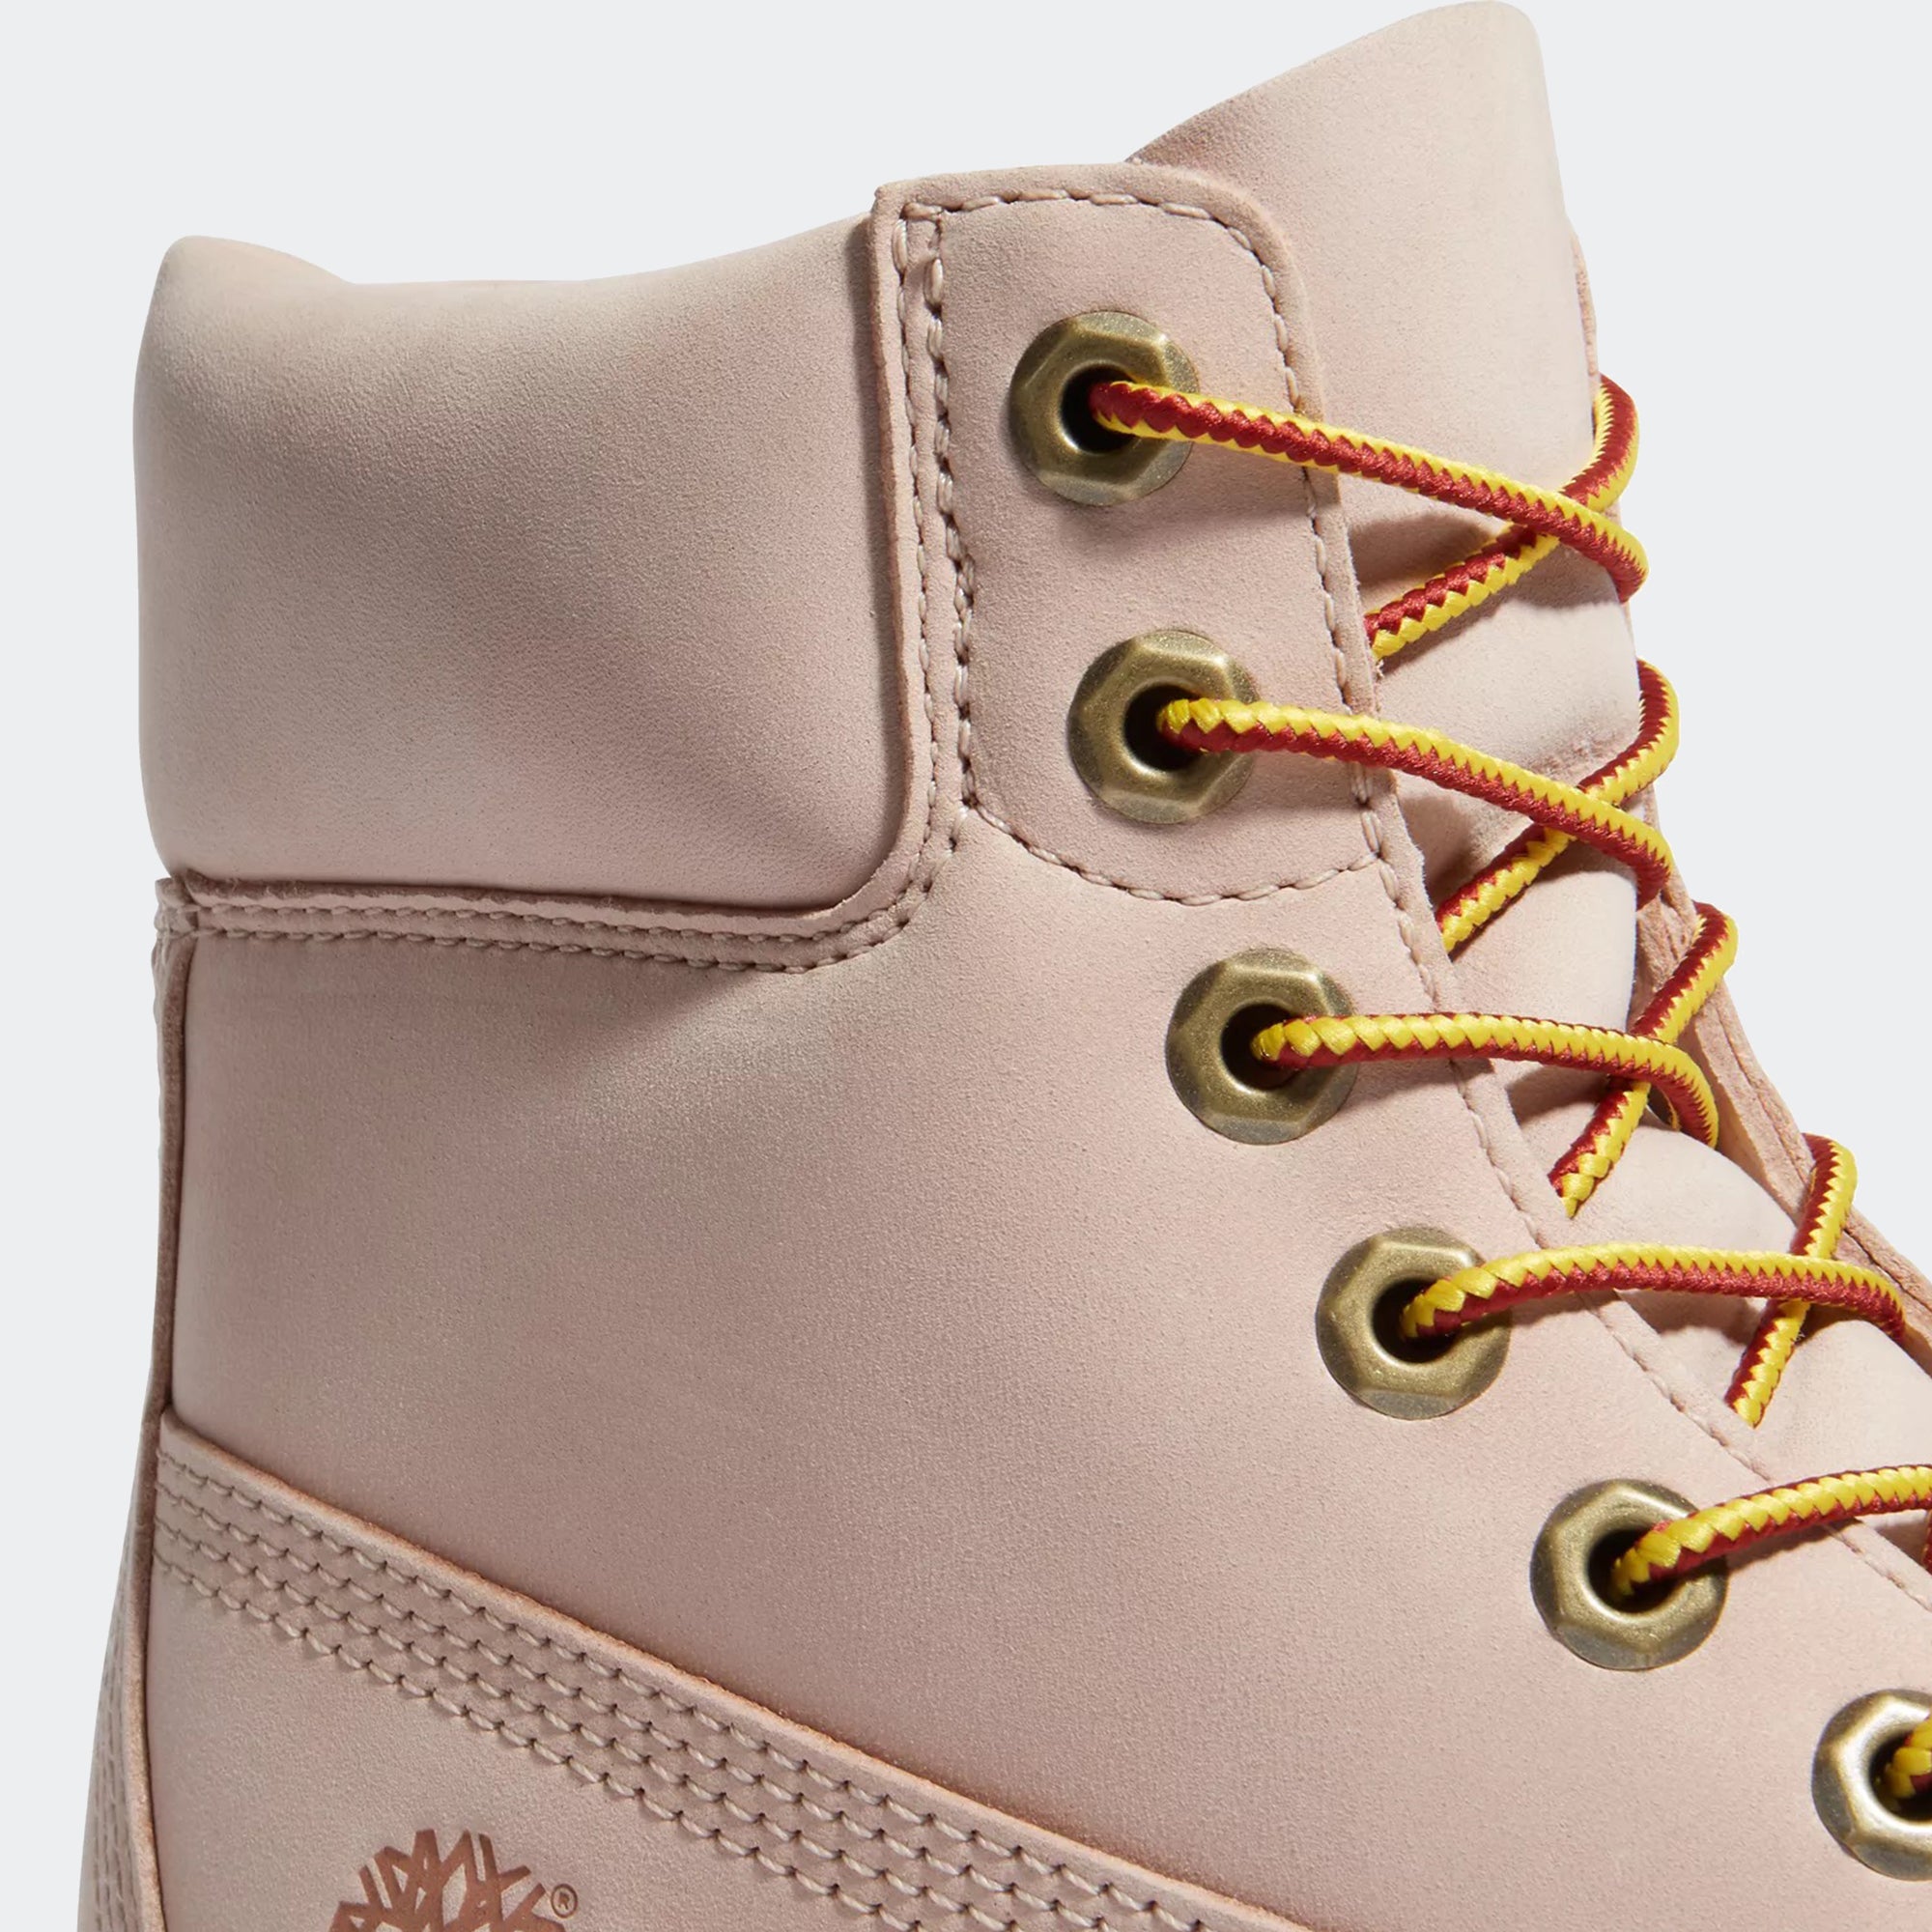 Extremo Increíble Engreído Timberland 6-Inch Waterproof Boots Light Pink | Chicago City Sports